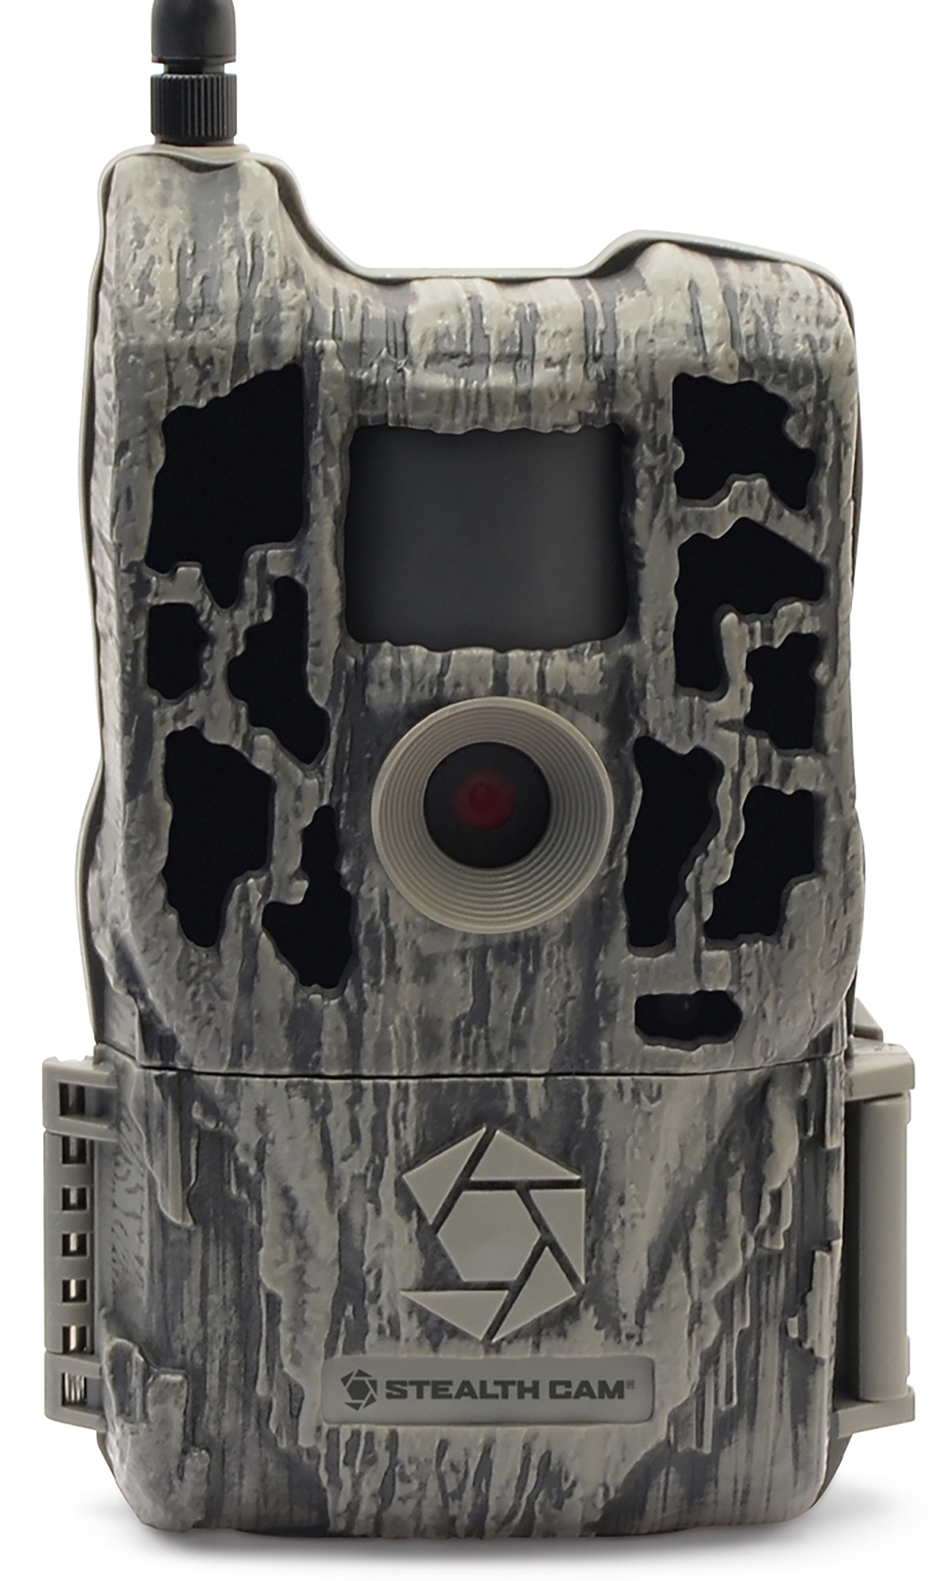 Stealth Cam Reactor, Steal Stc-ratw         26mp Reactor Cell  Att